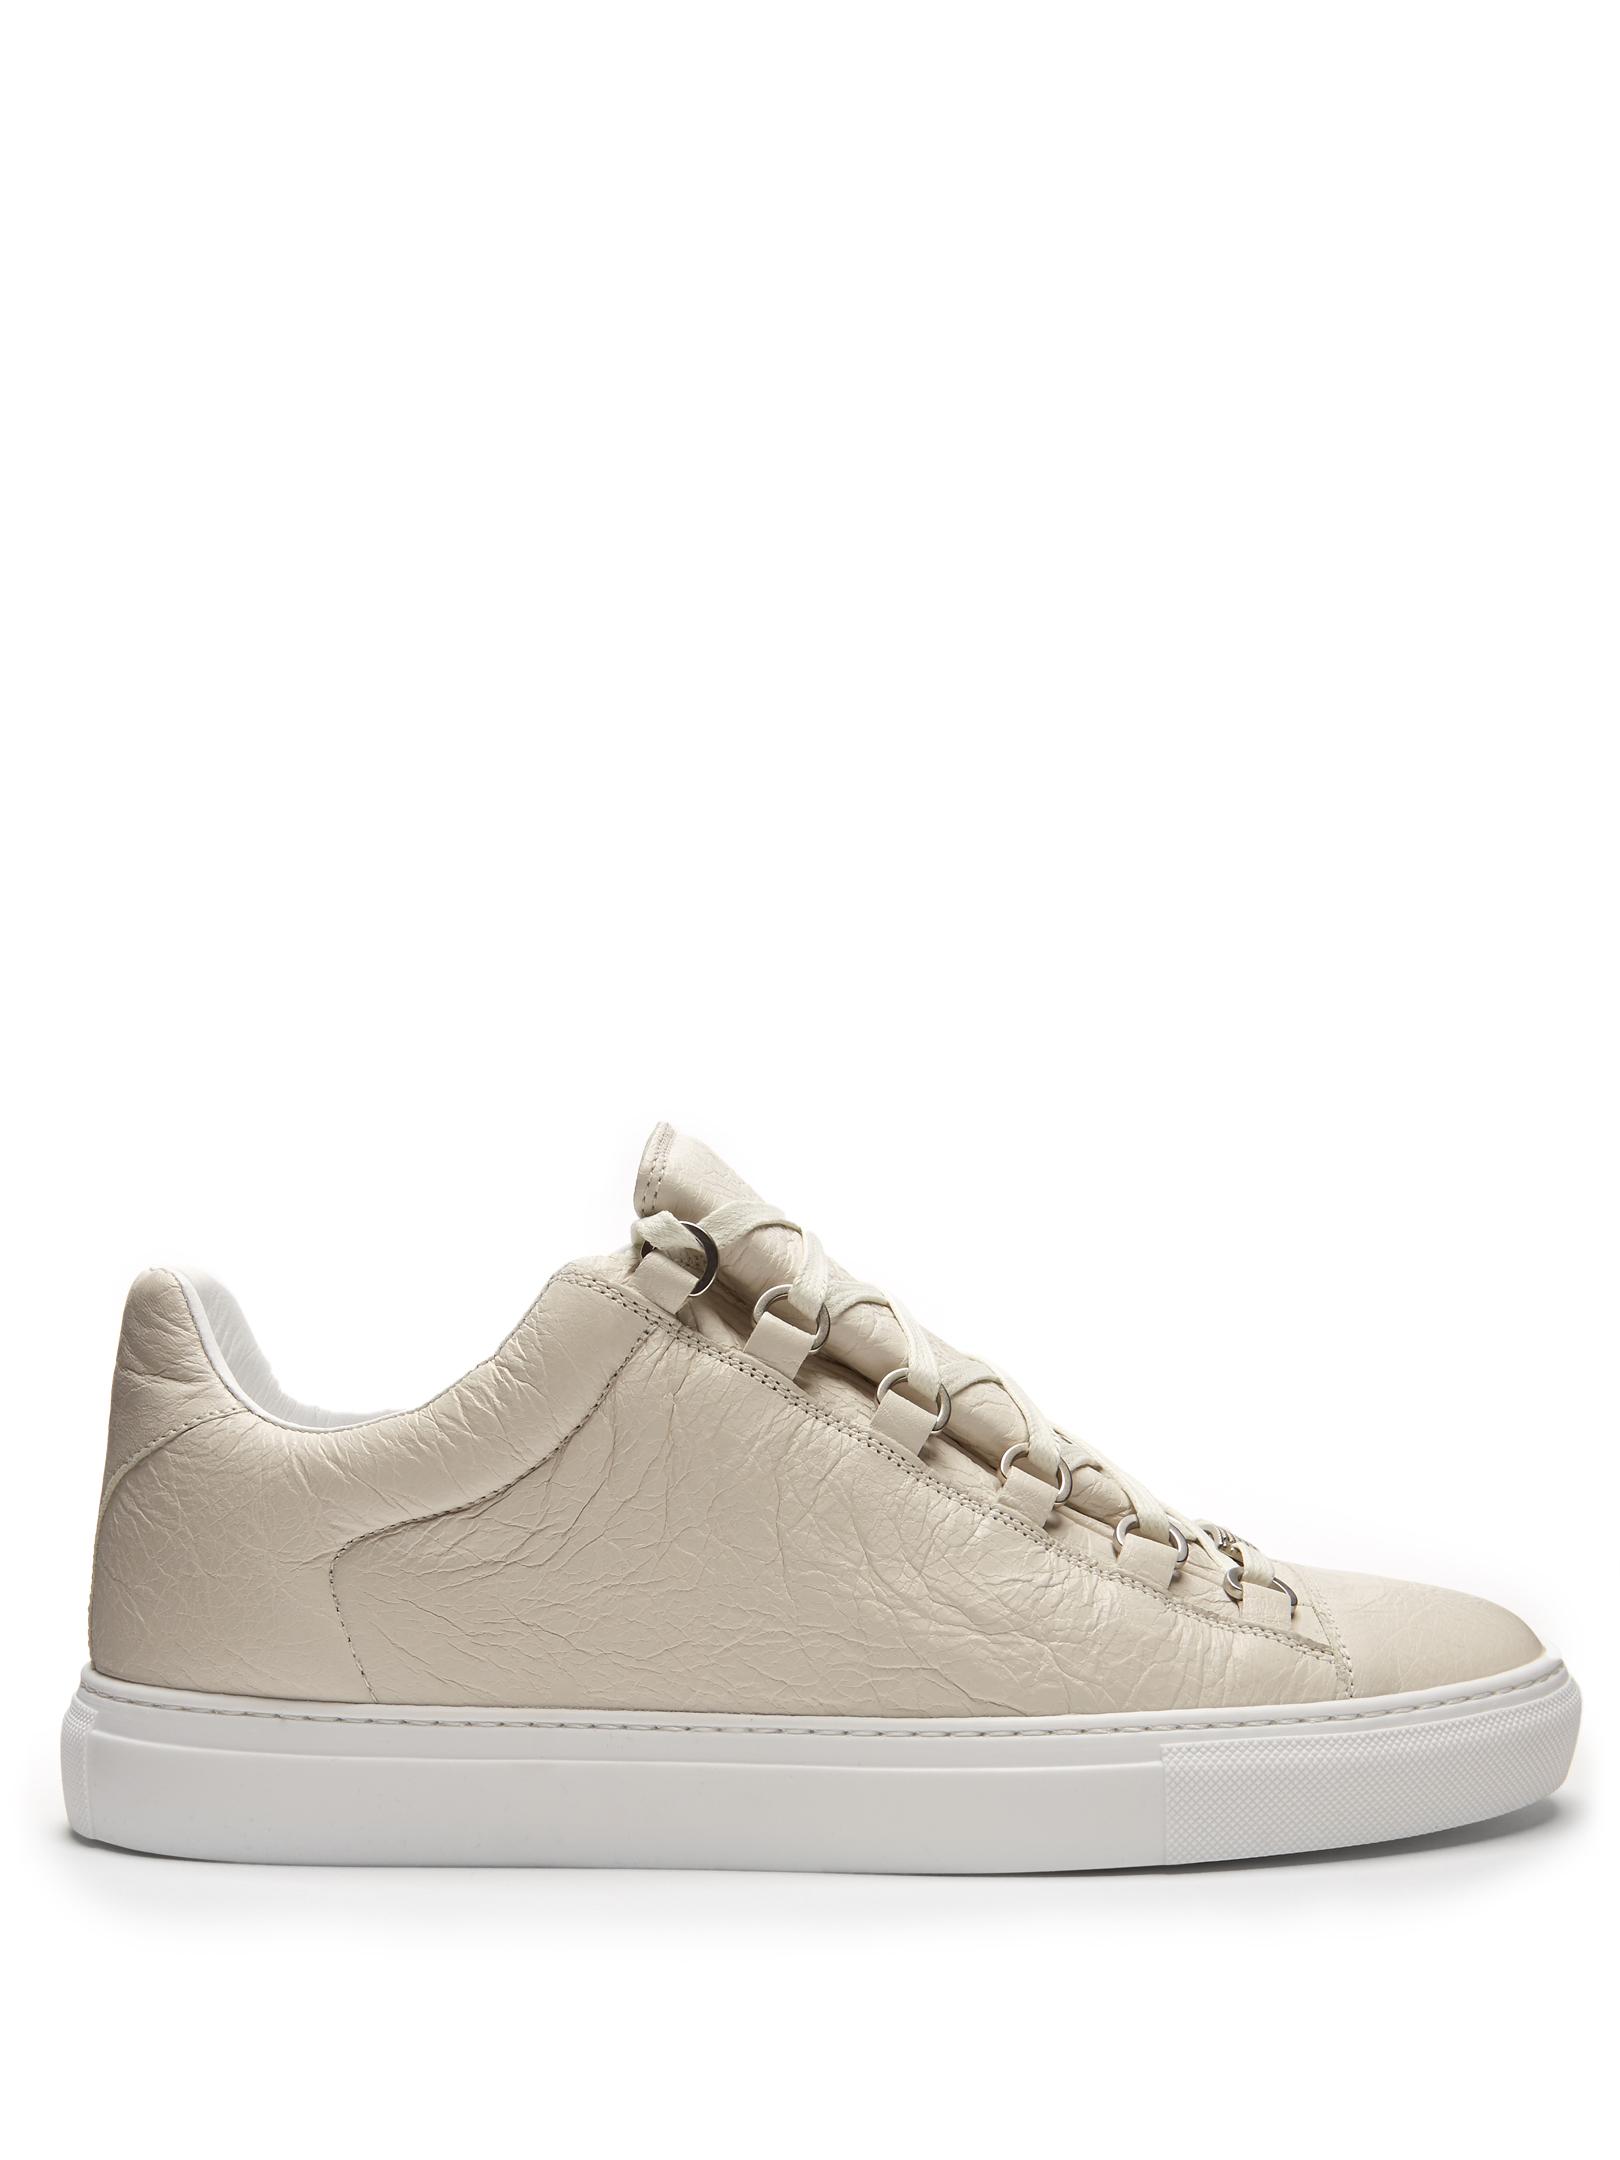 Balenciaga Arena Low-top Leather Trainers in White for Men - Lyst